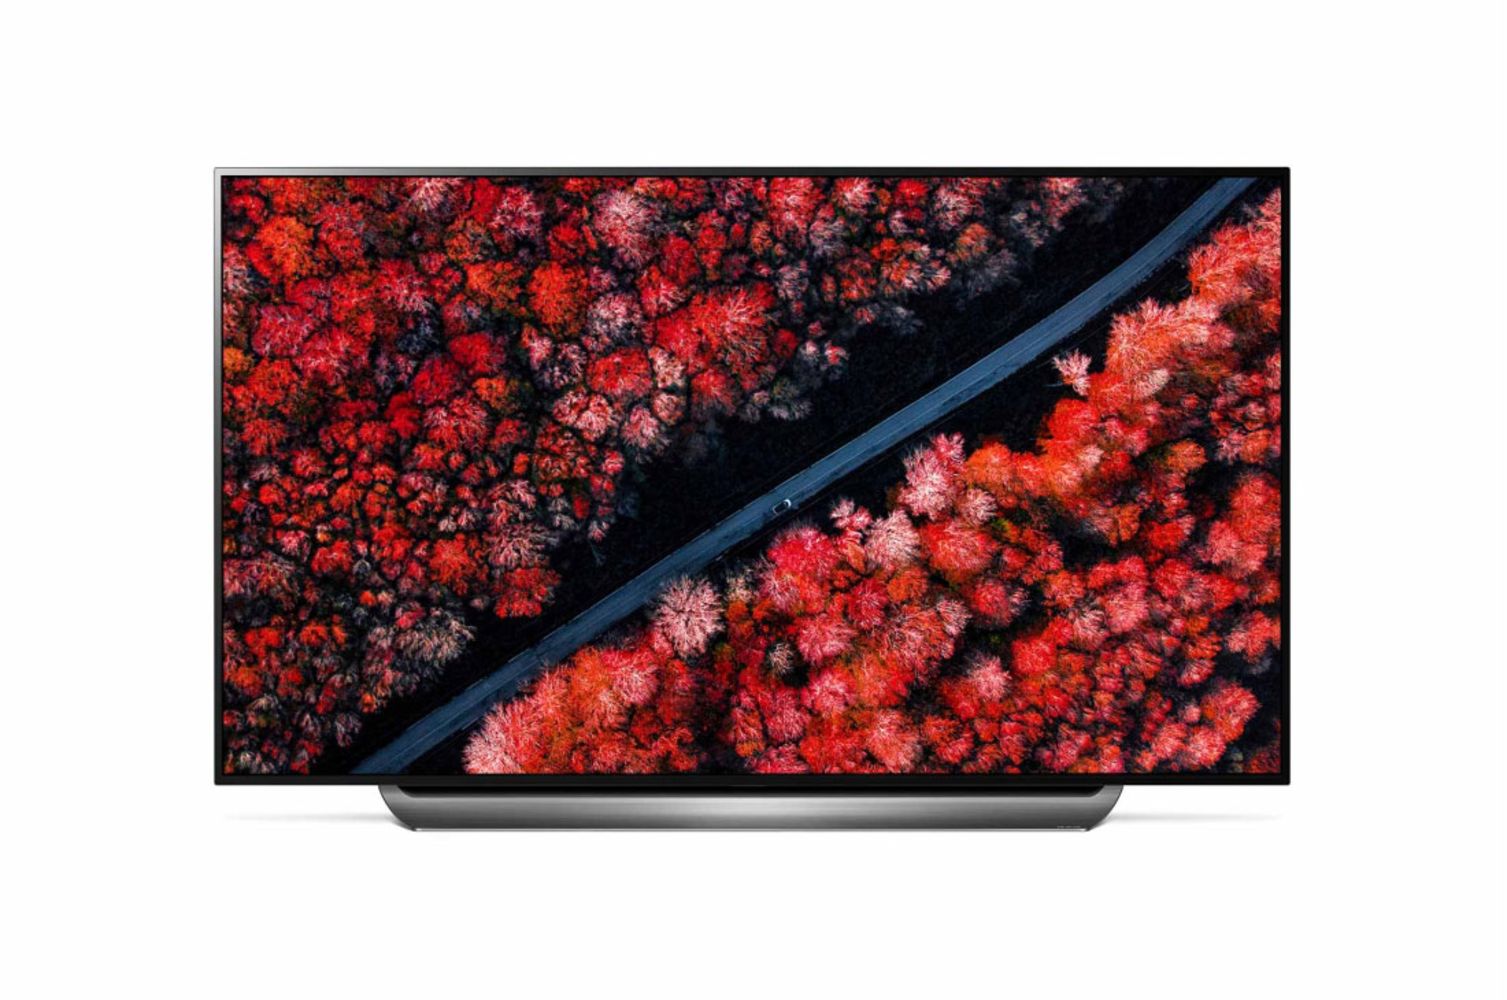 LG TVs & Monitors - Including 4K UHD Smart TVs up to 77 Inches